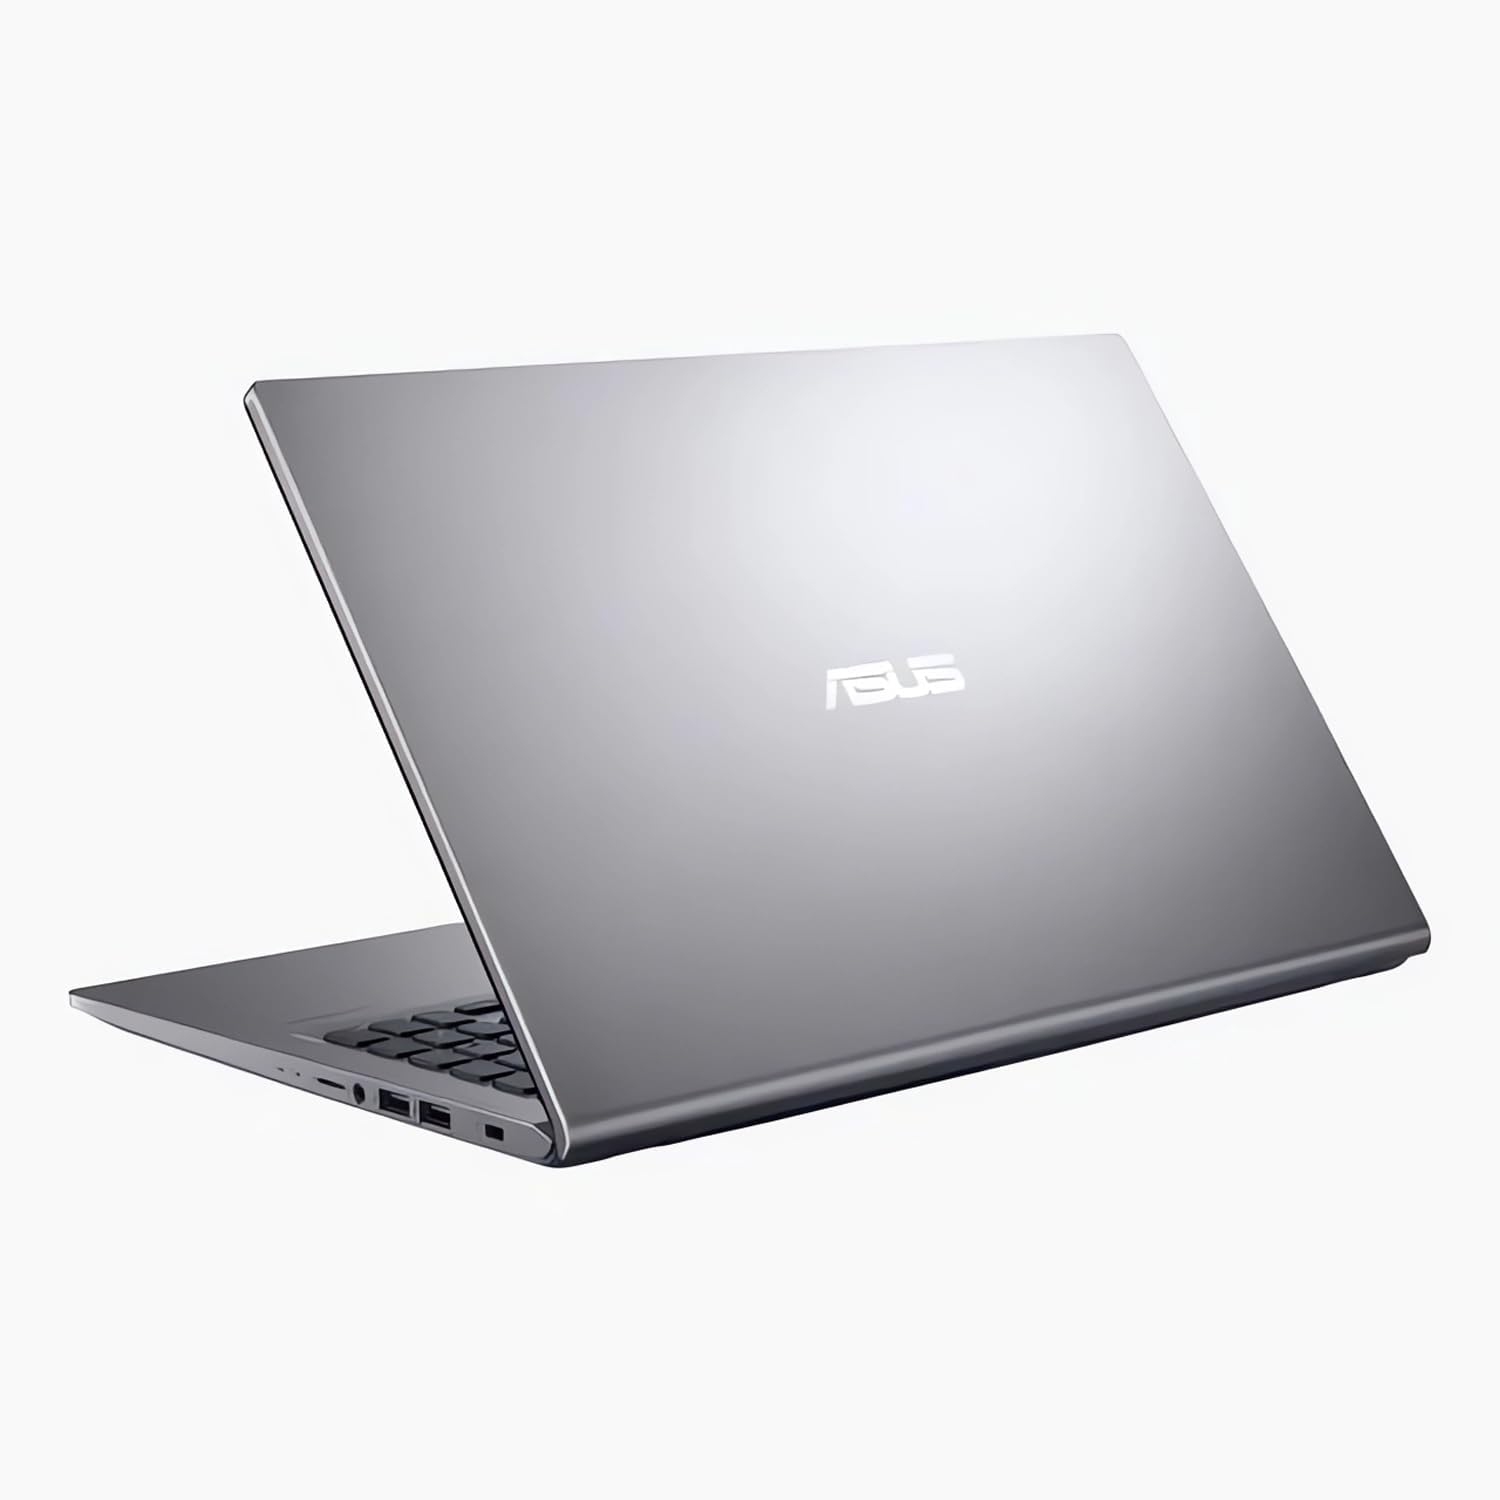 ASUS Vivobook 15.6” FHD Touchscreen Laptop, Intel Core i5-1135g7 (4-Core, up to 4.2 GHz), 20GB DDR4 RAM, 512GB PCIe SSD, Intel Iris Xe Graphics, Windows 11 Home, Grey,